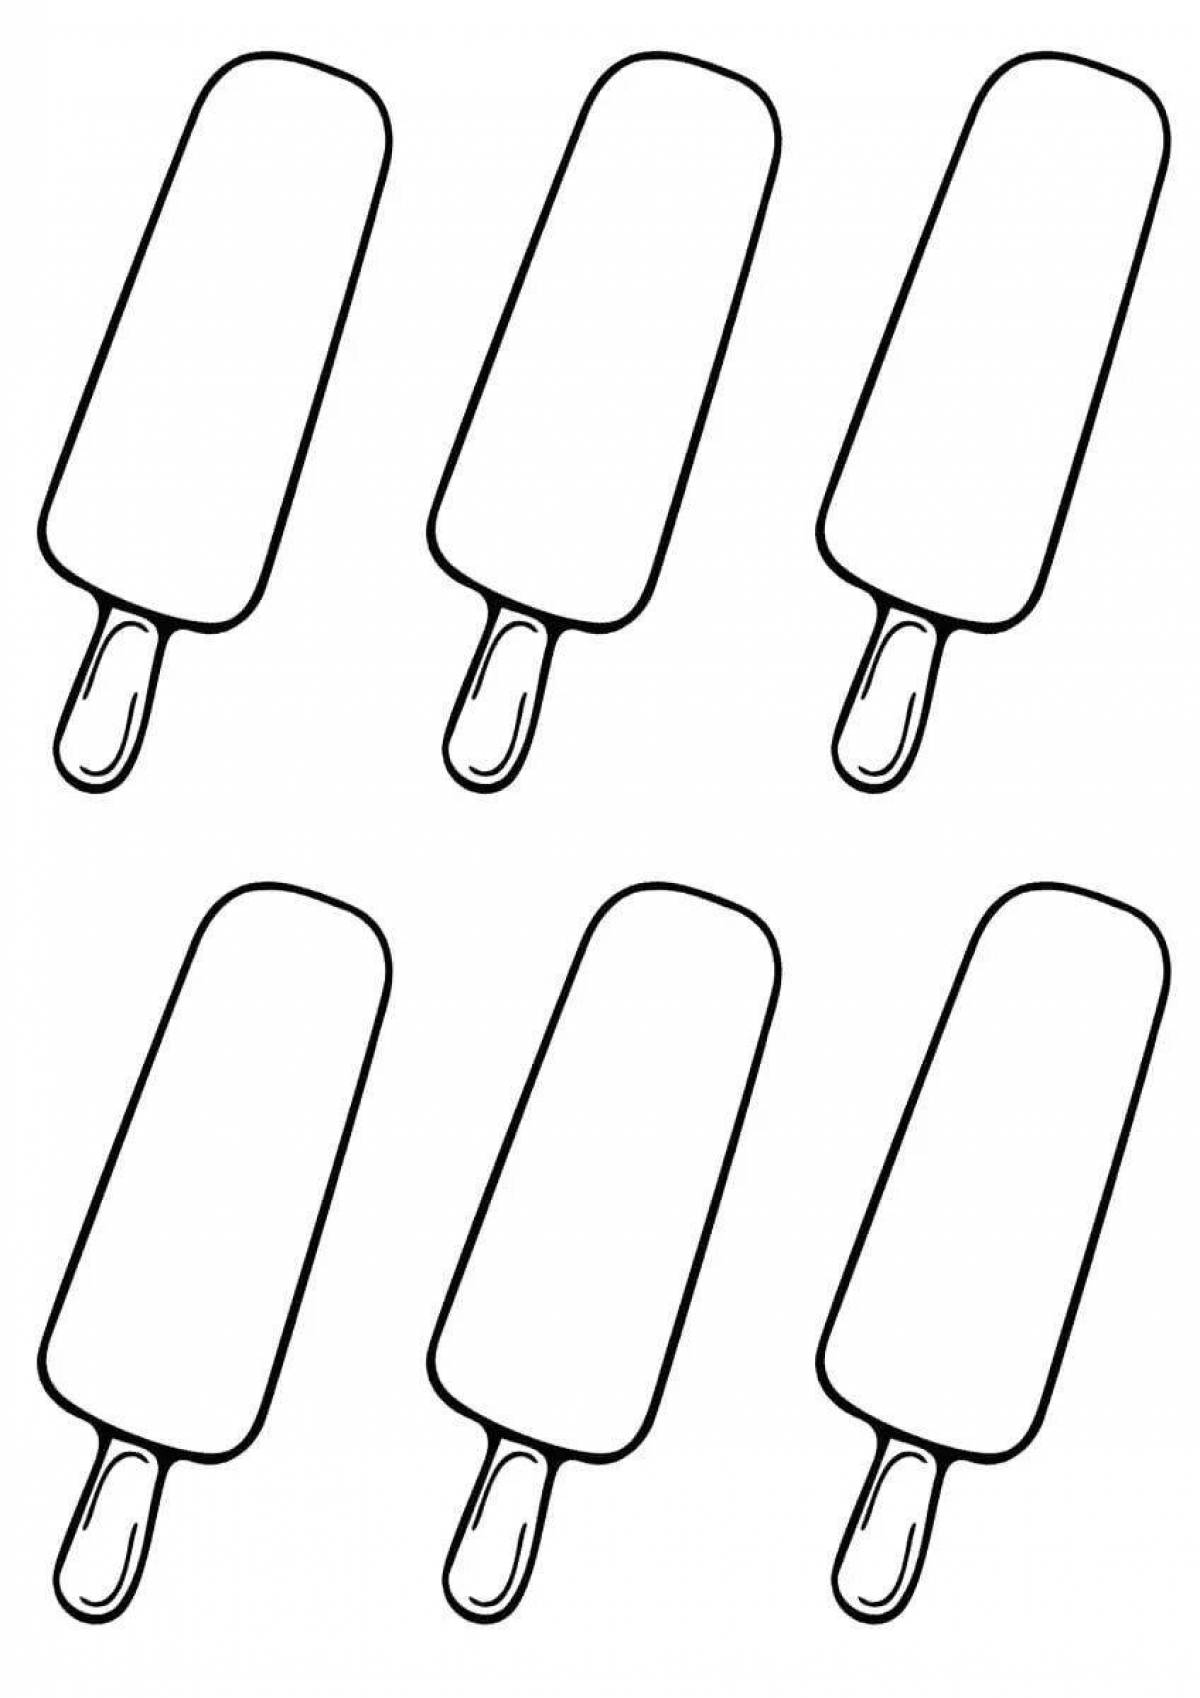 Coloring gourmet popsicle ice cream